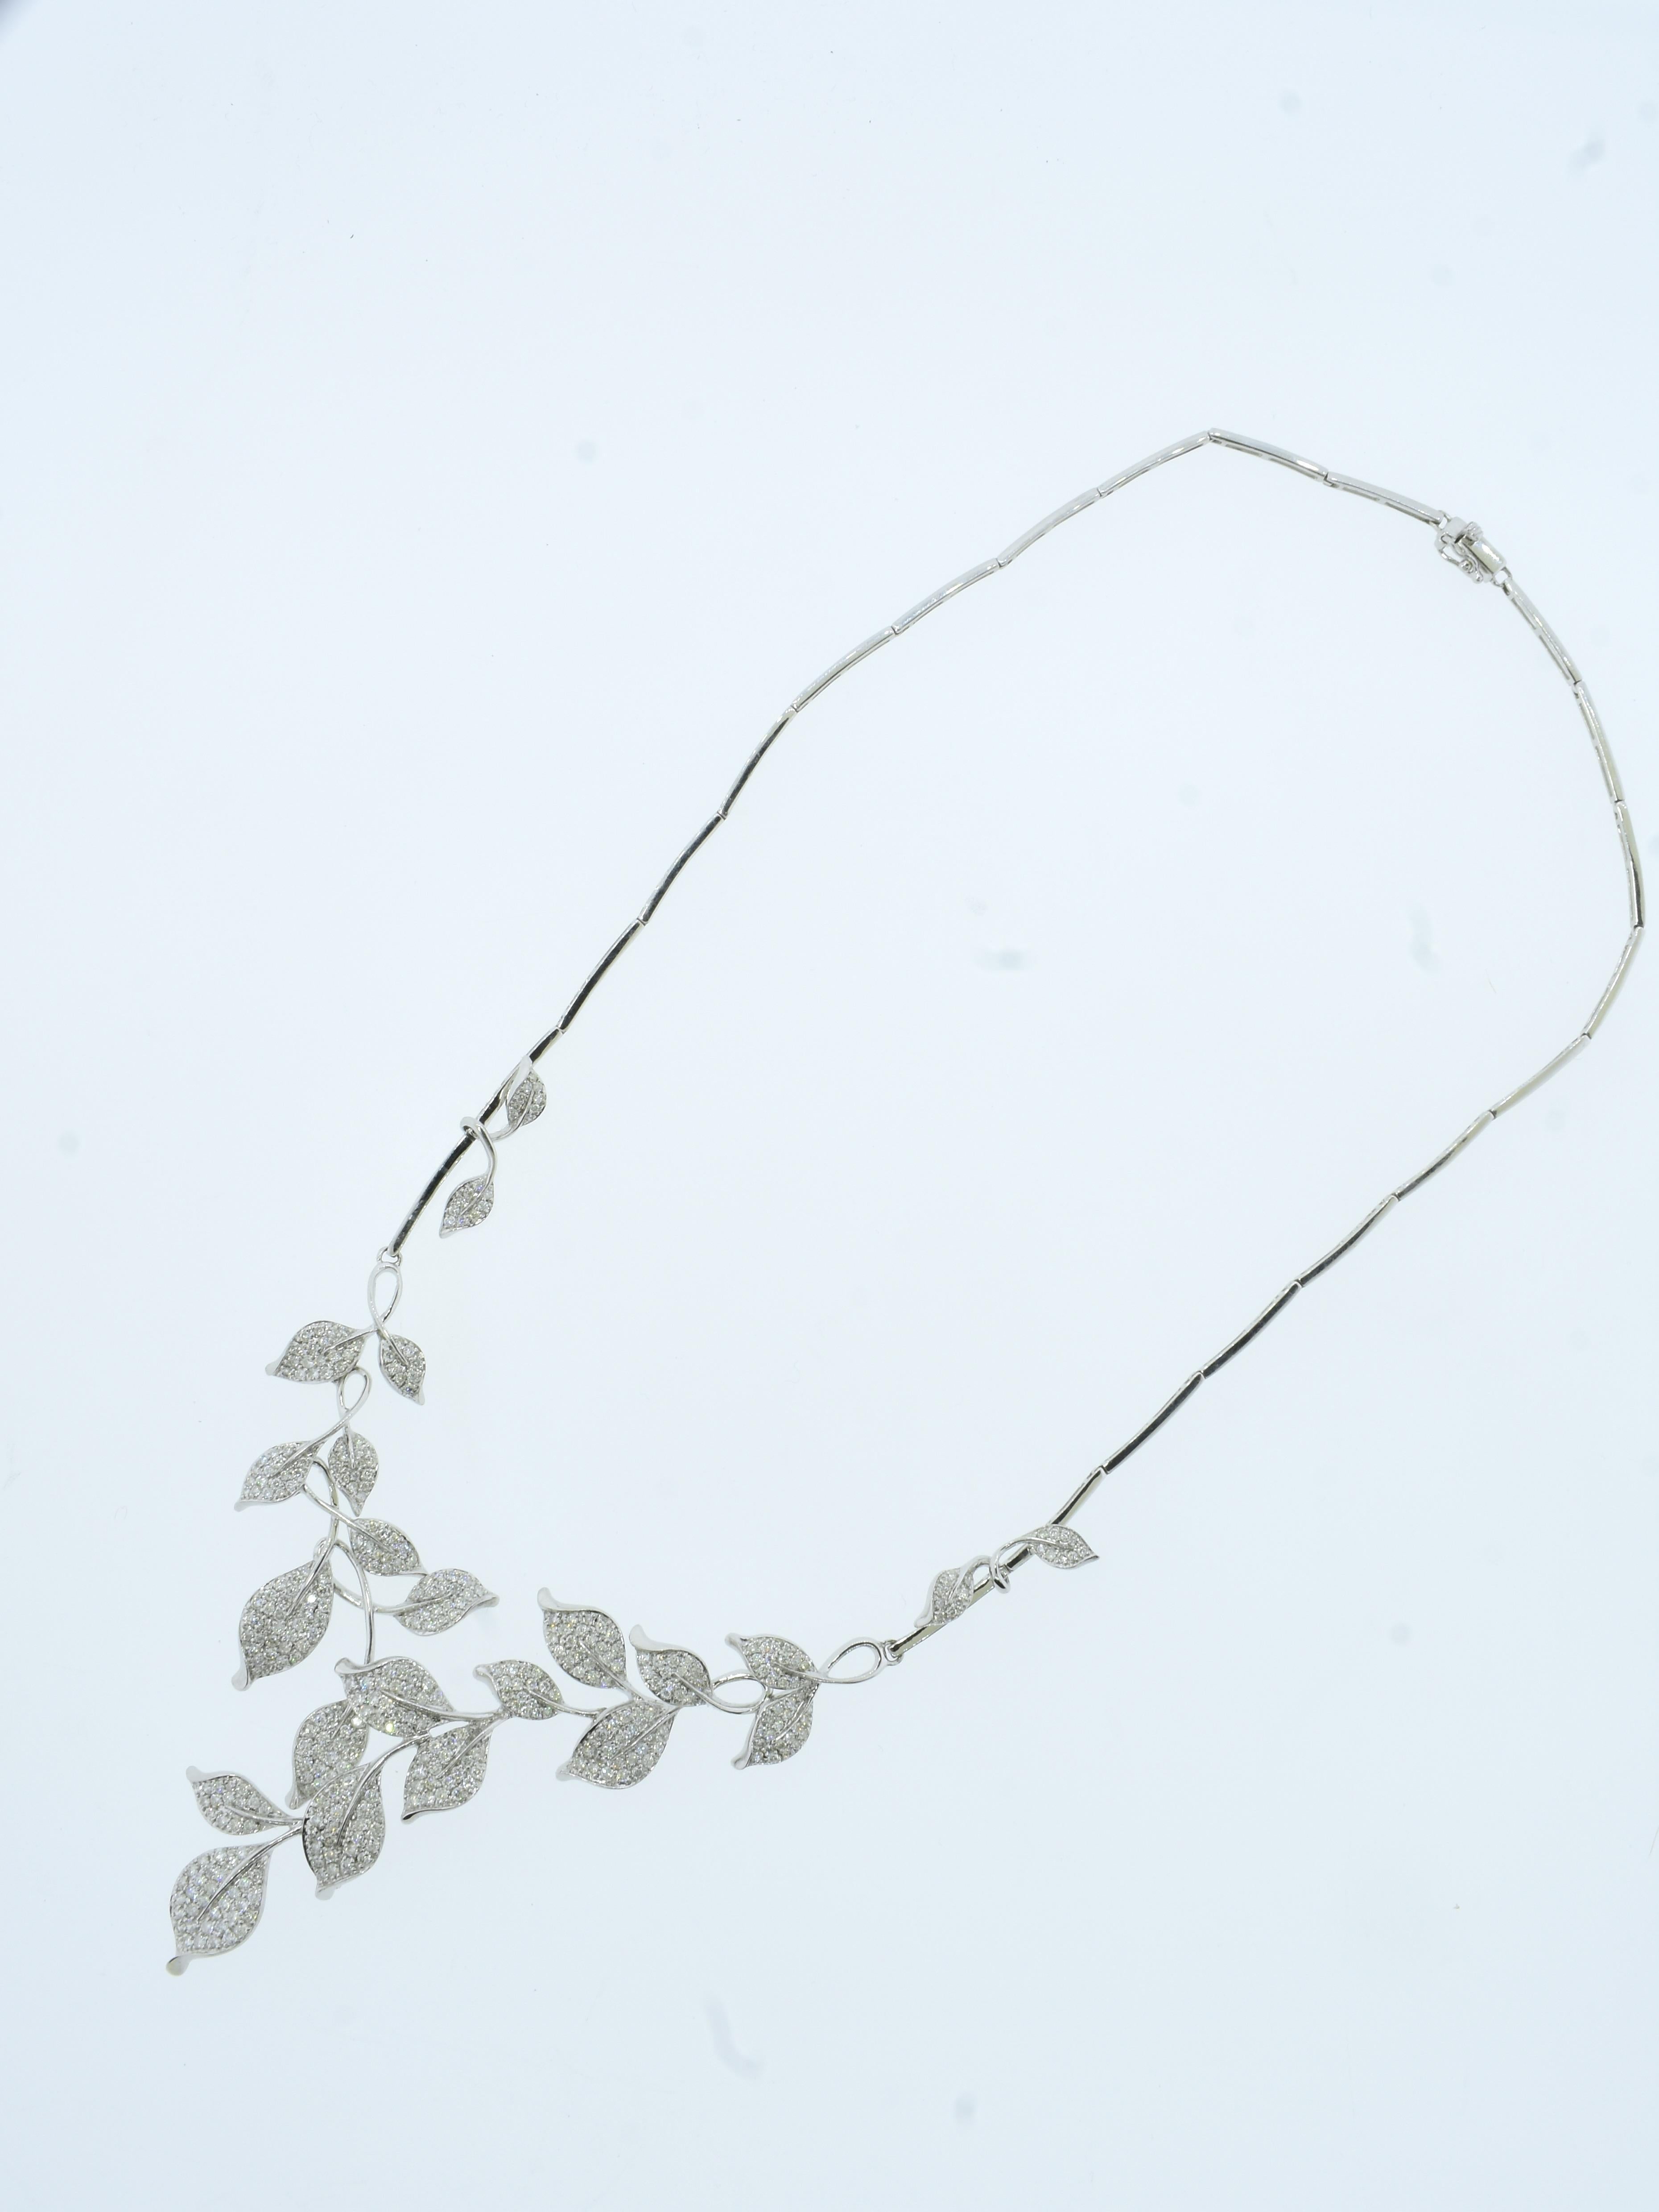 Diamond and 18K White Gold Contemporary Necklace of Stylized Foliage. For Sale 6